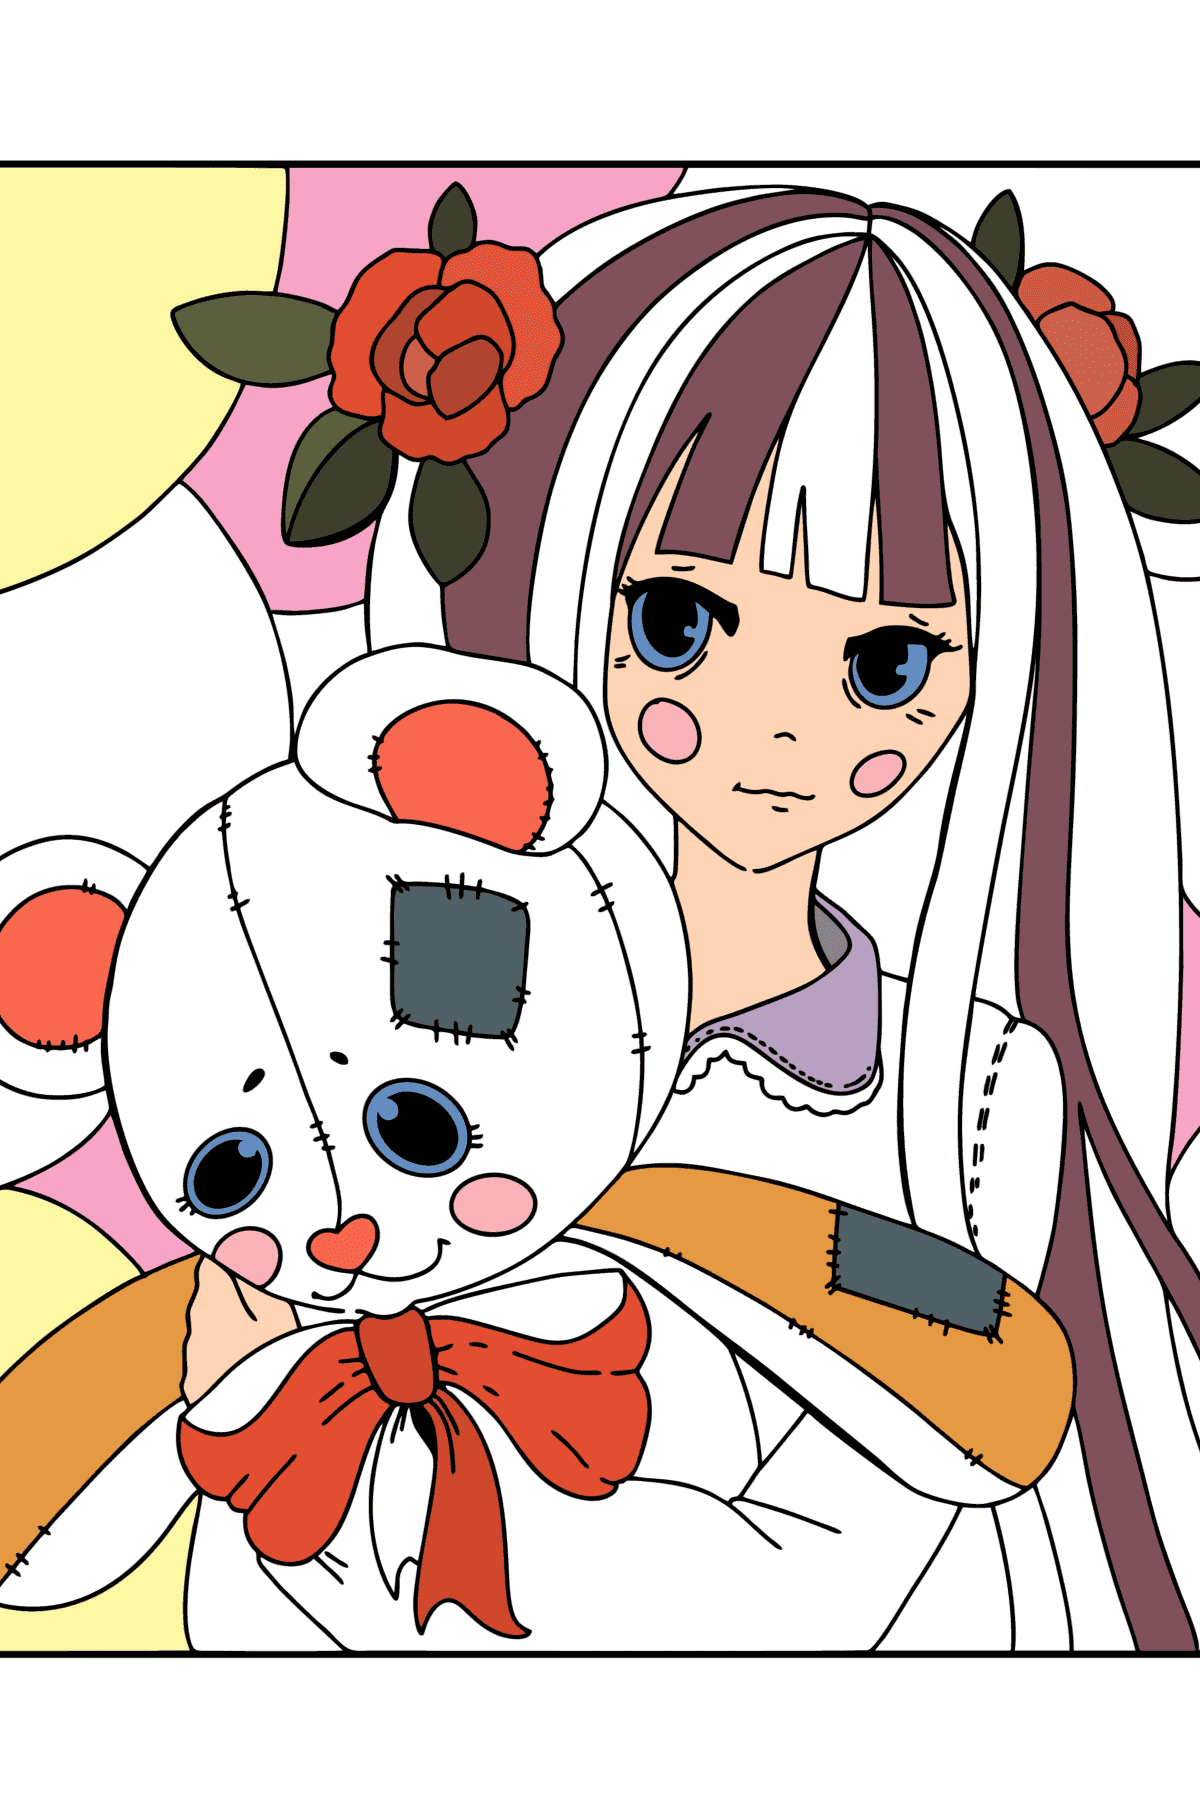 Anime girl coloring page holding a teddy - Coloring Pages for Kids